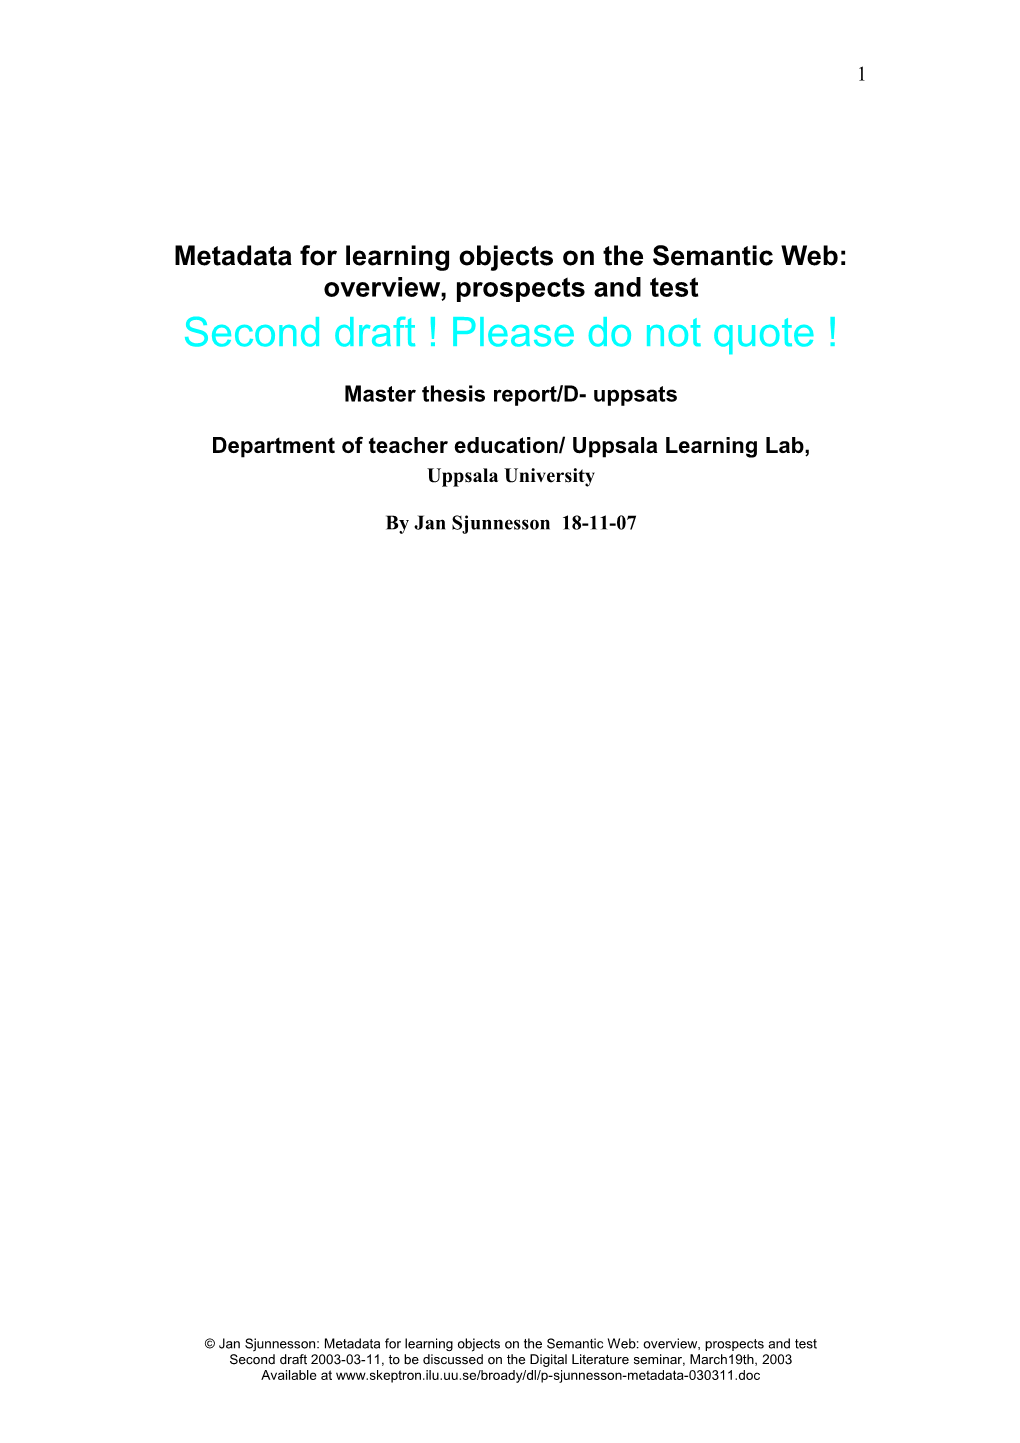 Metadata for Learning Objects on the Semantic Web: Overview, Prospects and Test